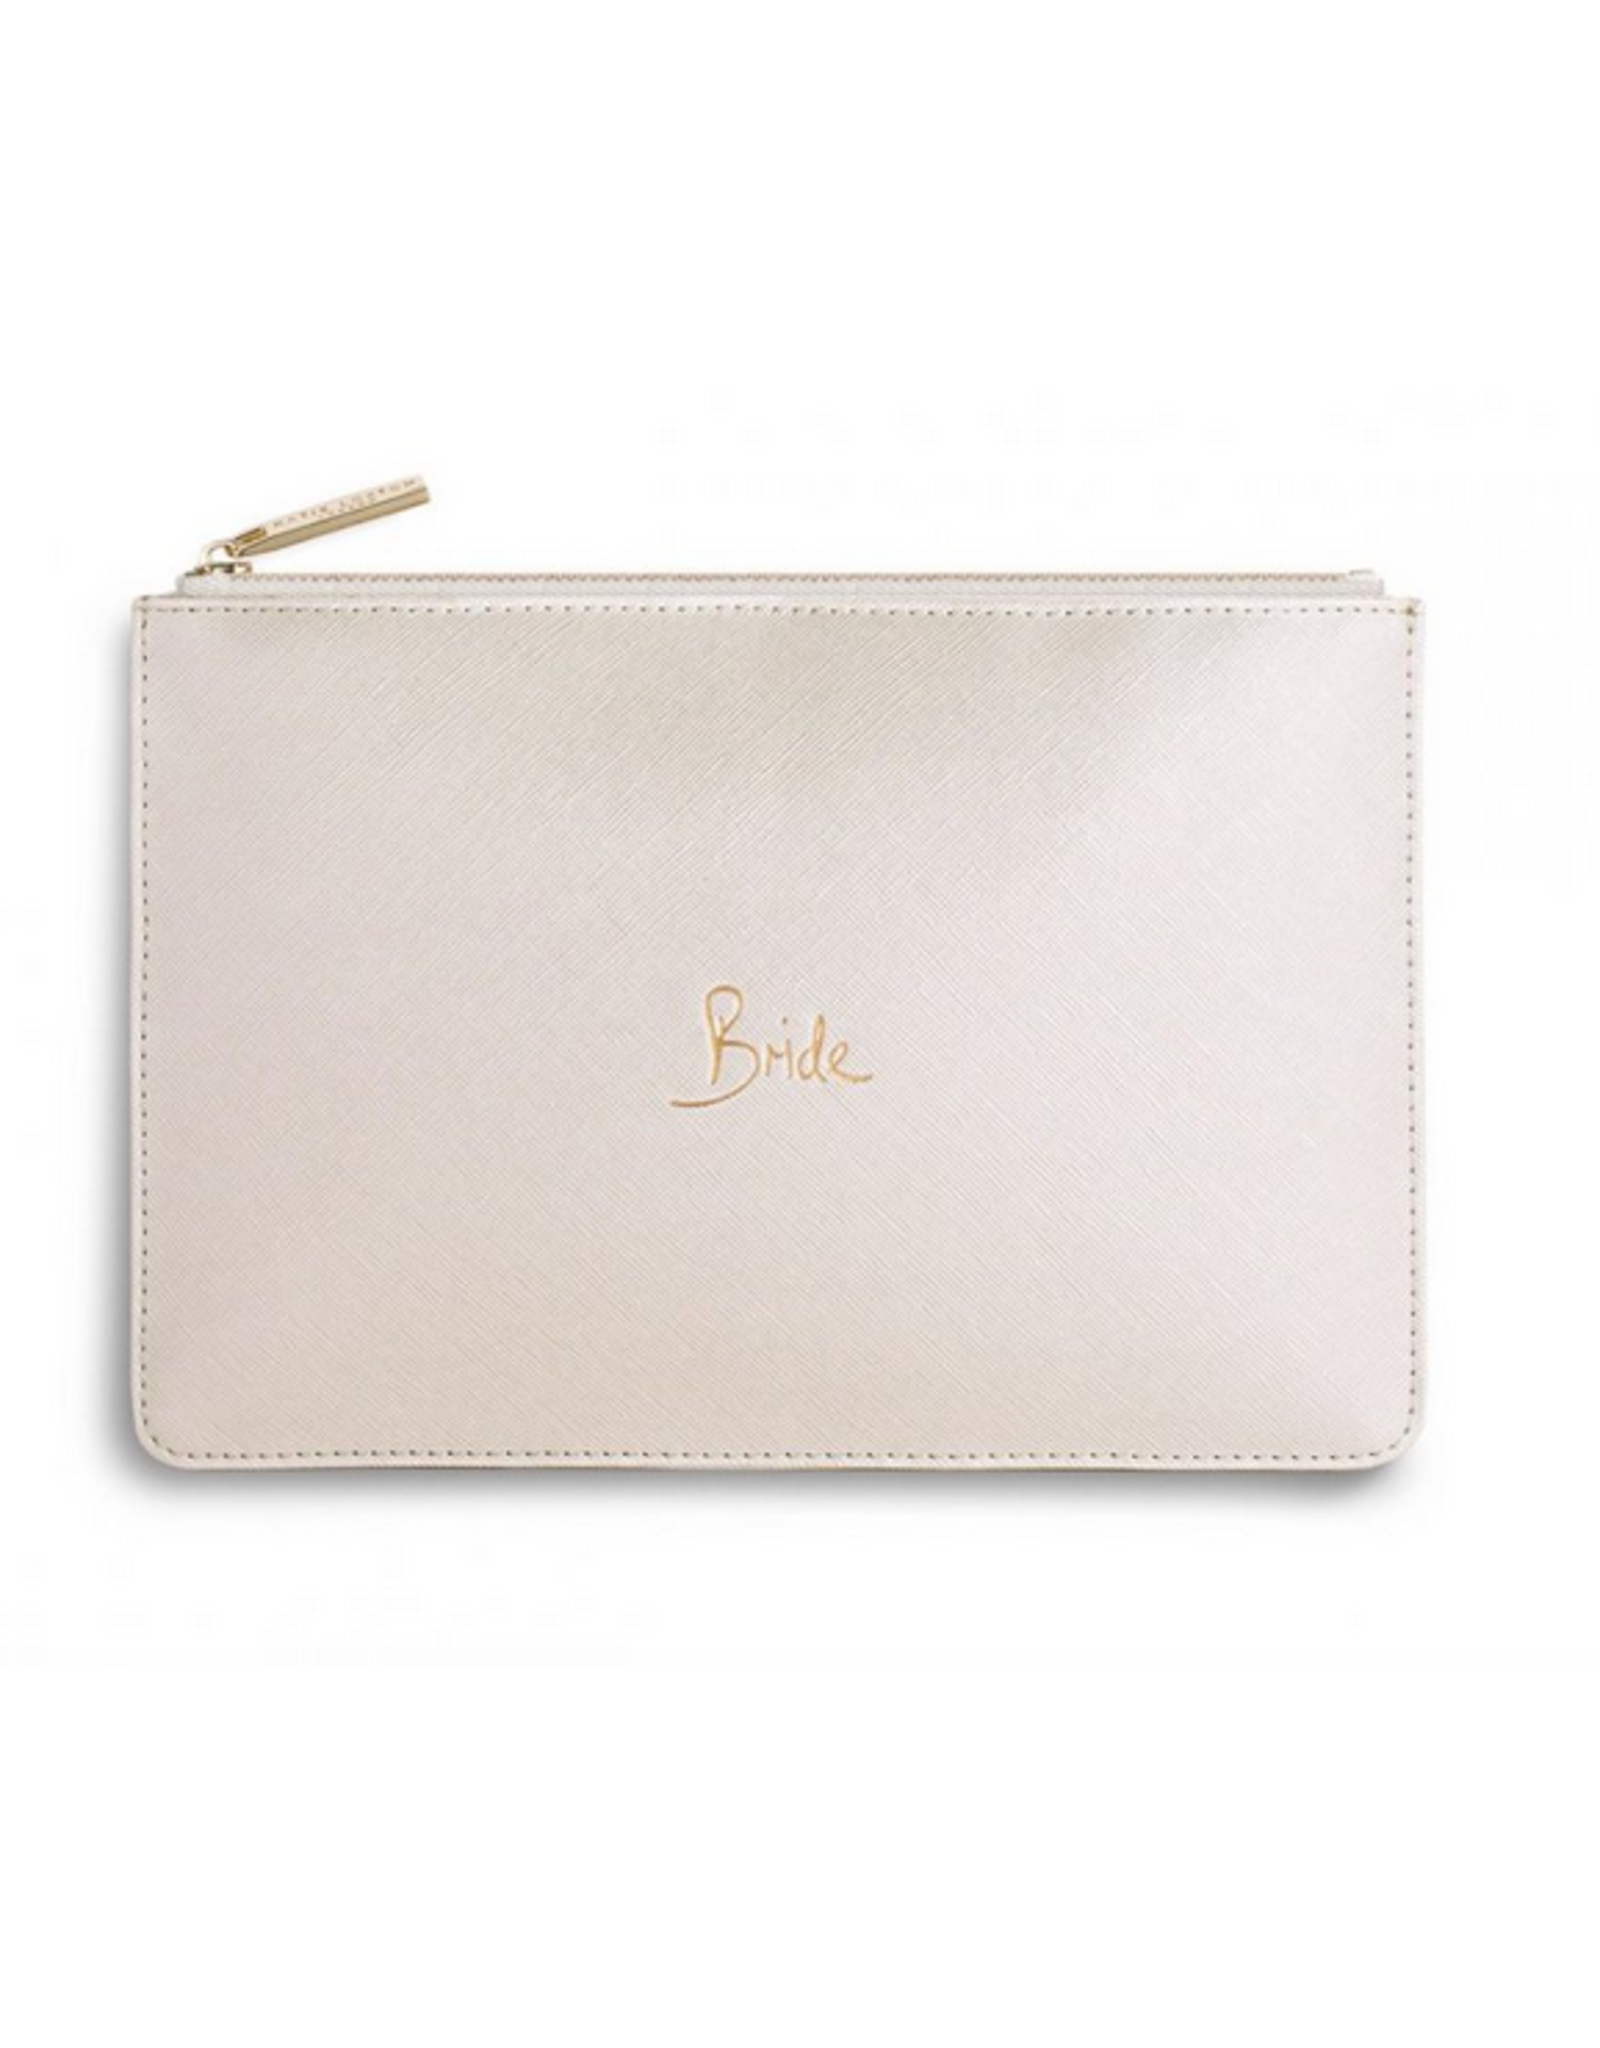 Katie Loxton Bride Perfect Pouch in Blush Pink